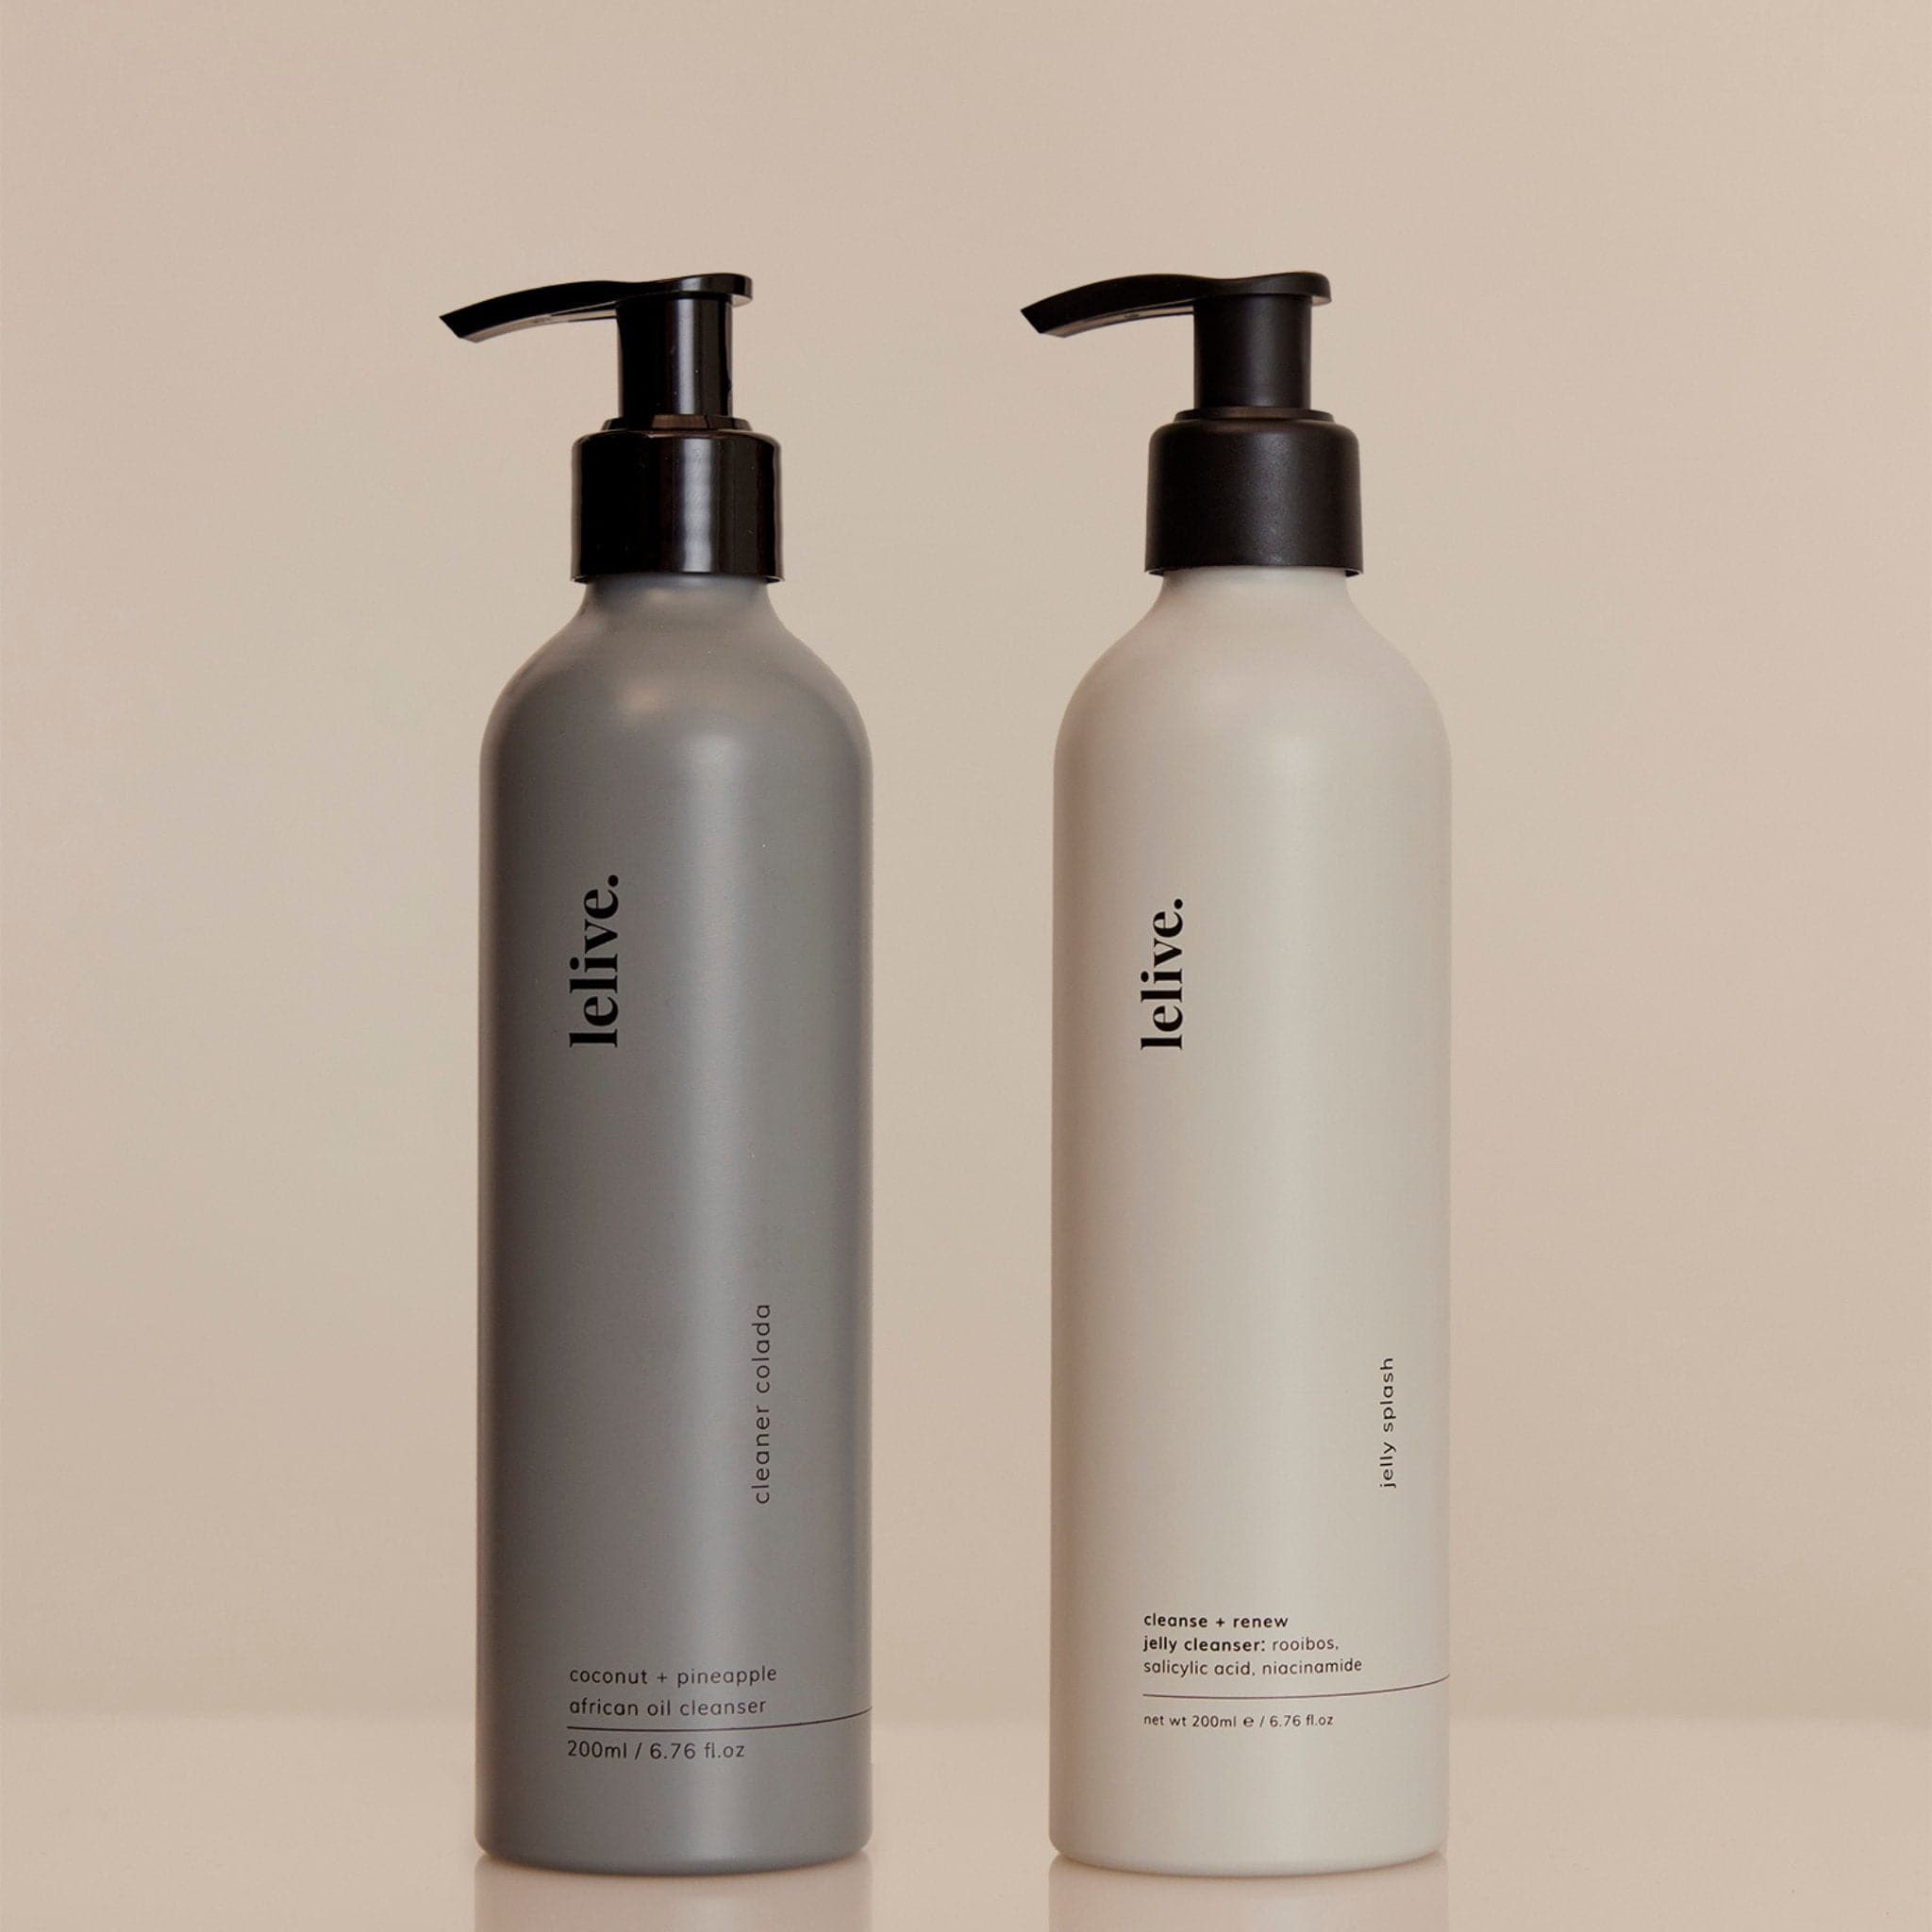 double cleanse duo | remove + clarify + renew - lelive